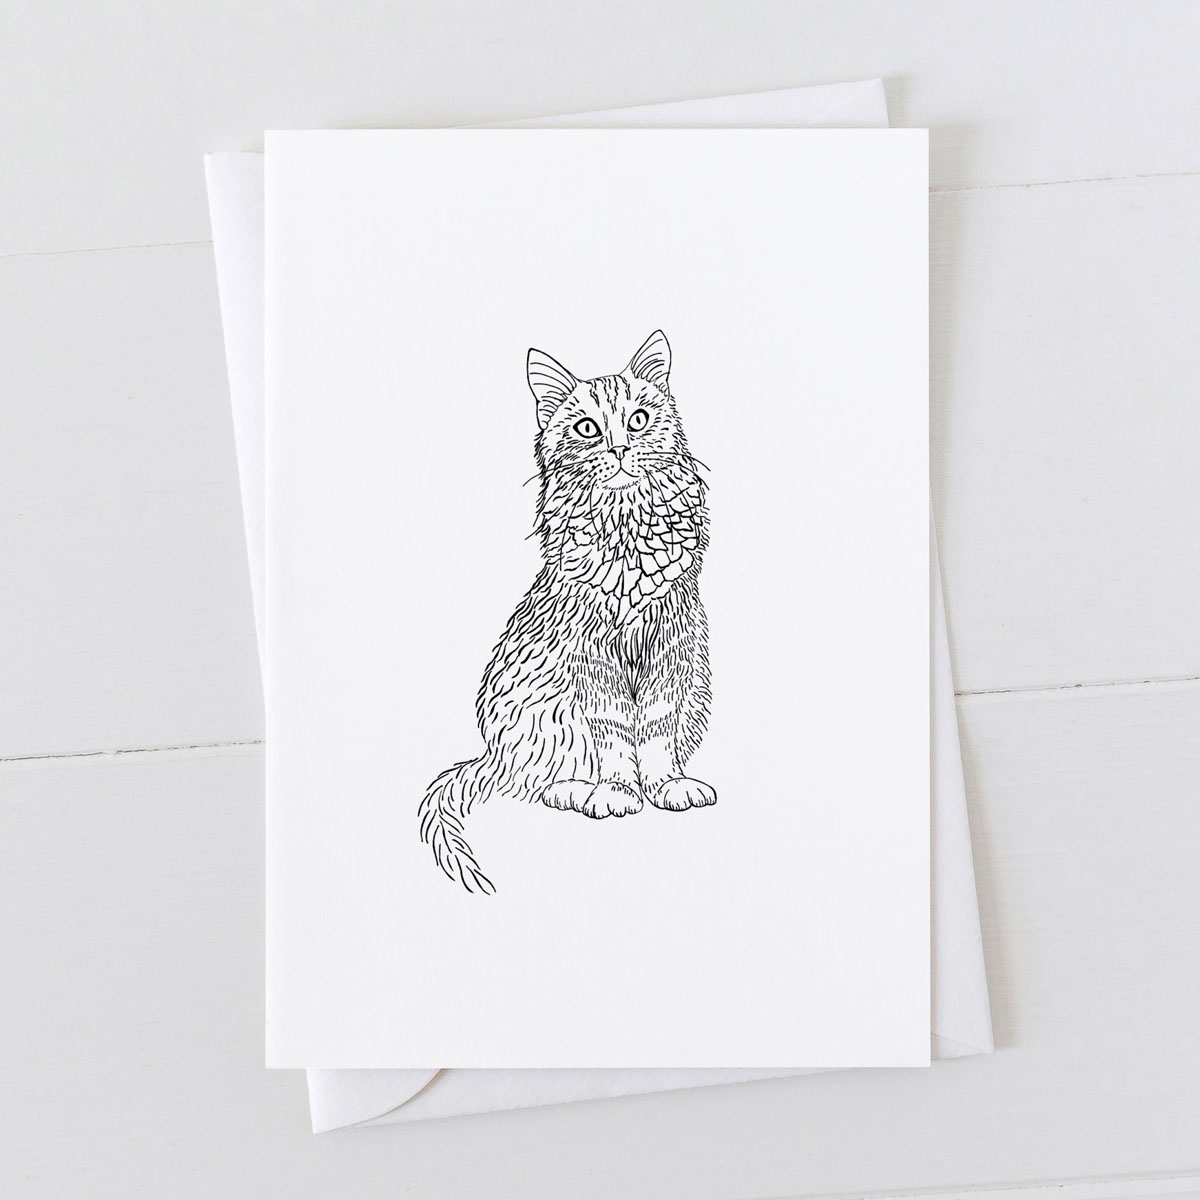 Cat Pen And Ink Drawing Greeting Card